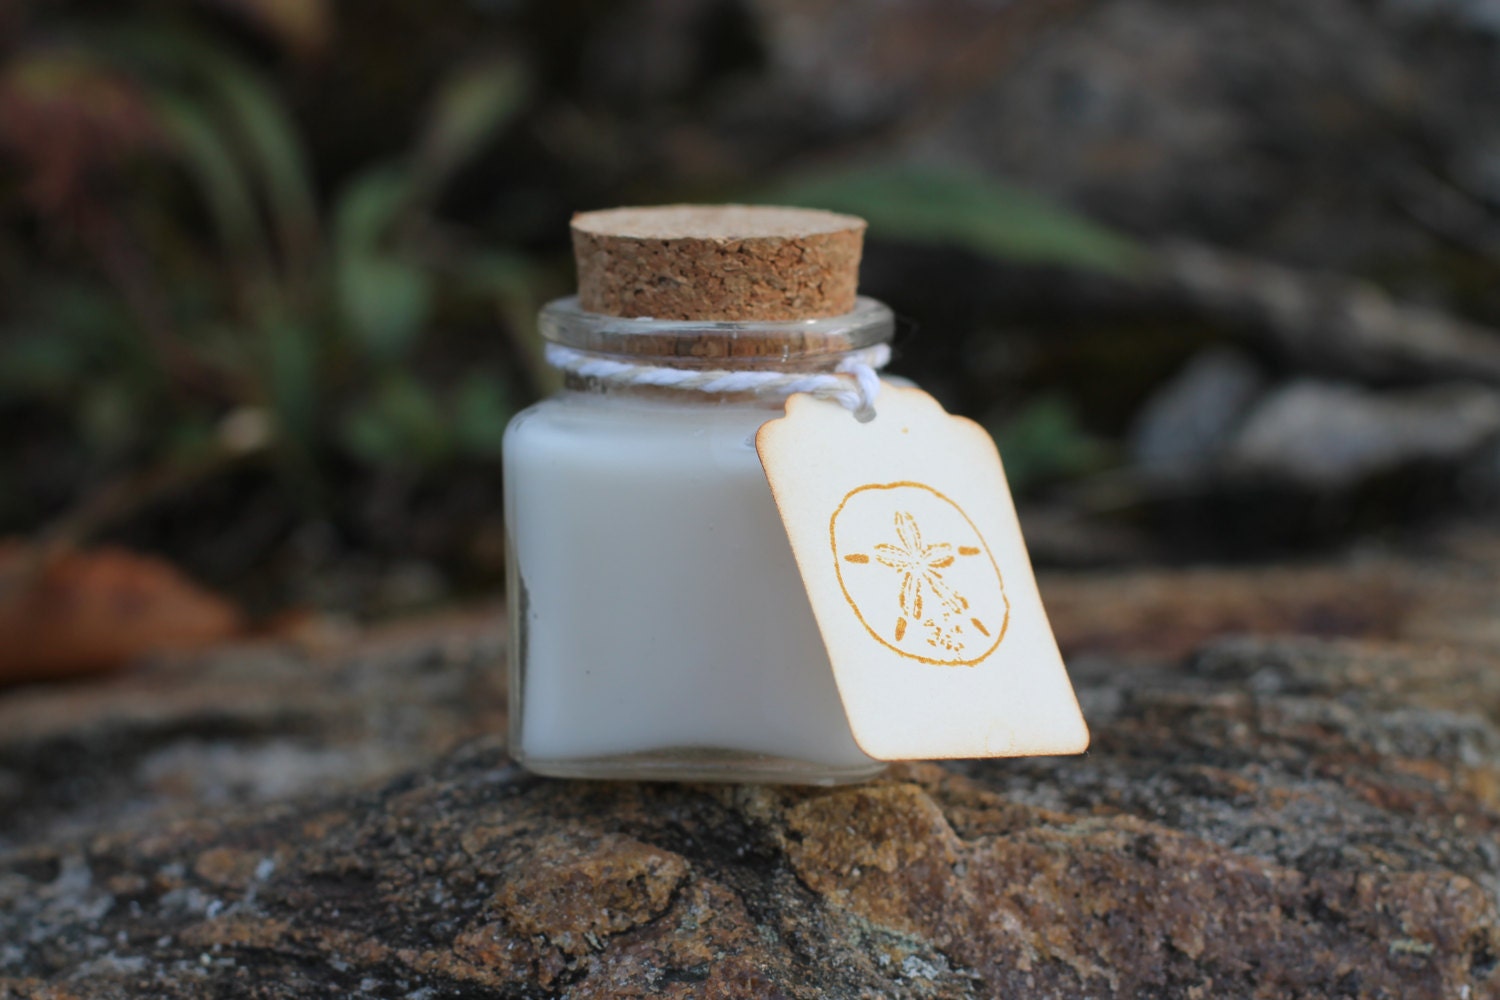 Wedding Favor Candle Square Recycled Glass Jar with Cork-Wedding-Baby-Bridal Shower-Soy Candle Favor Belle Savon Vermont